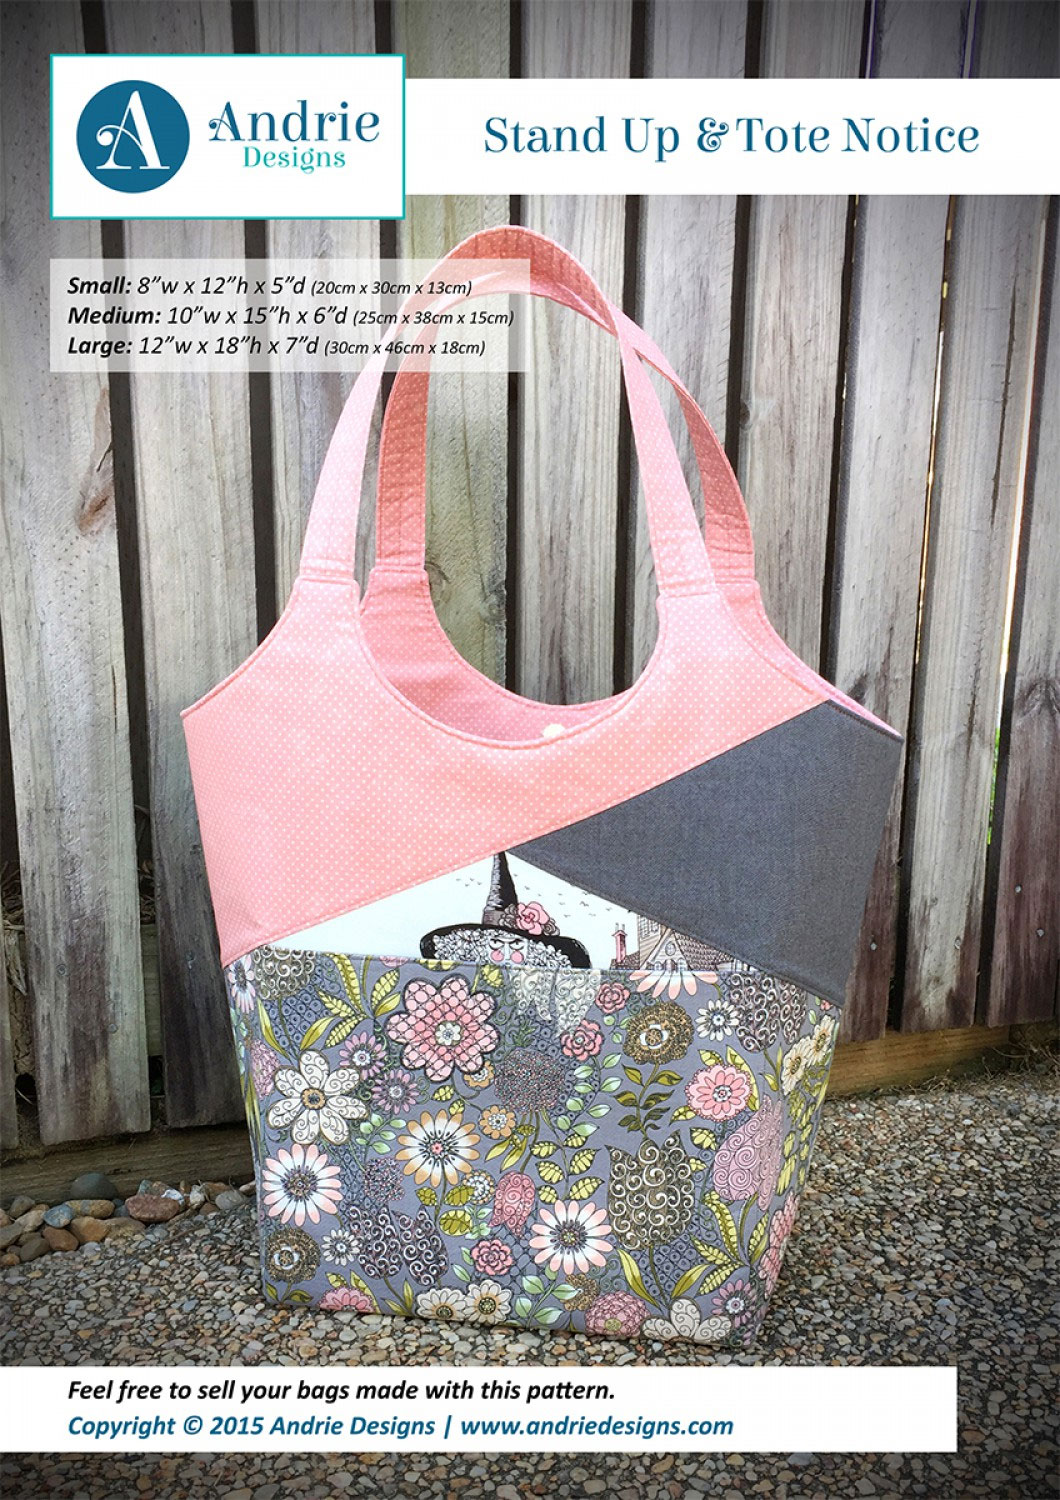 Stand-up-and-tote-notice-sewing-pattern-andrie-designs-front